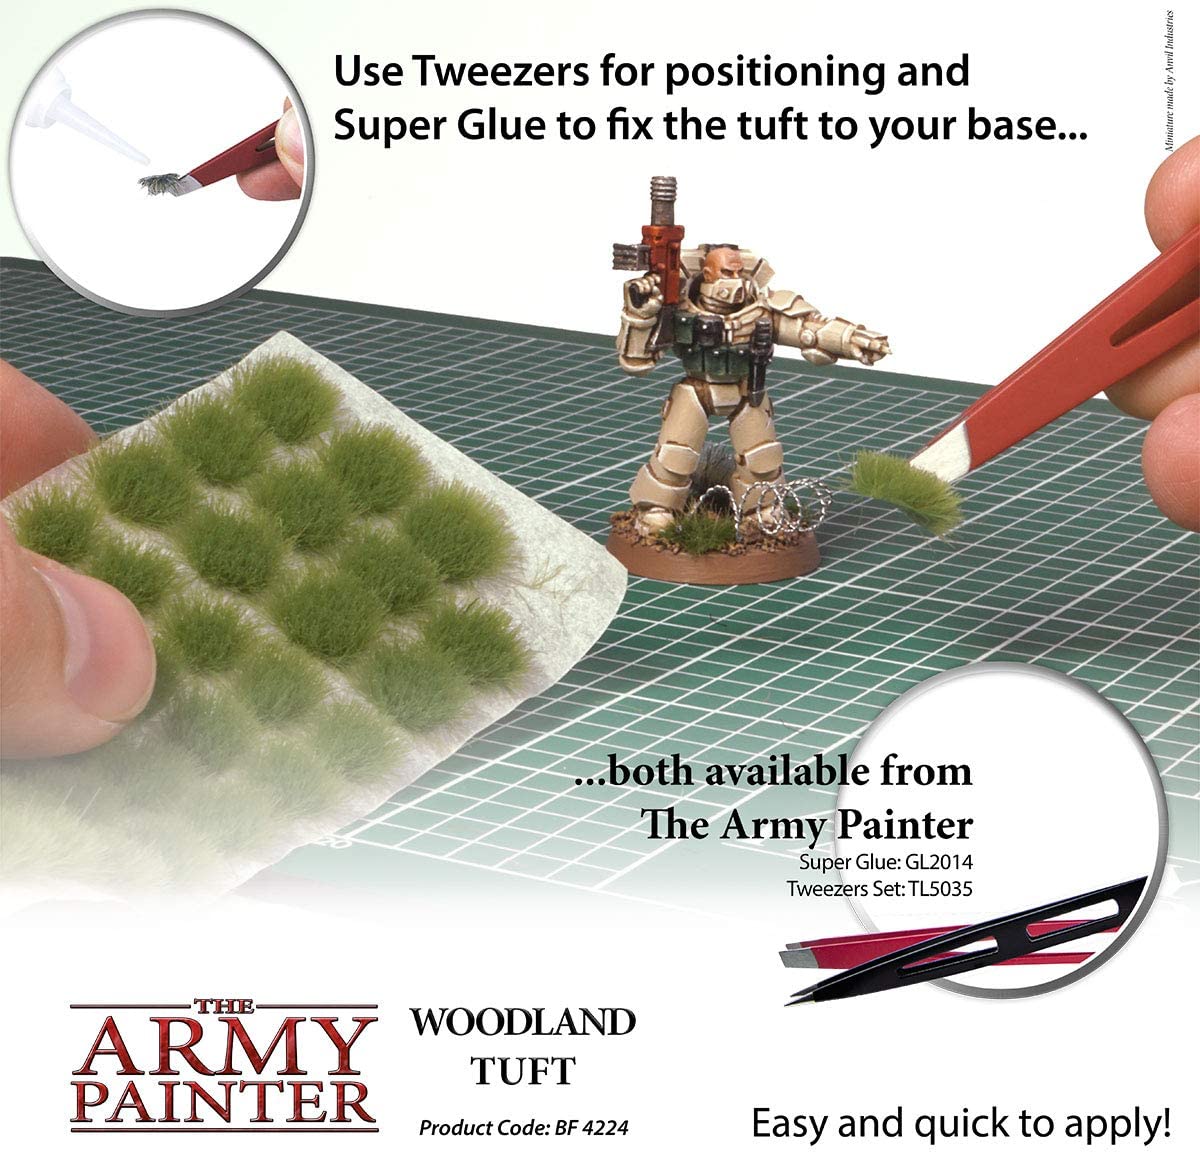 The Army Painter - Tufts: Woodland